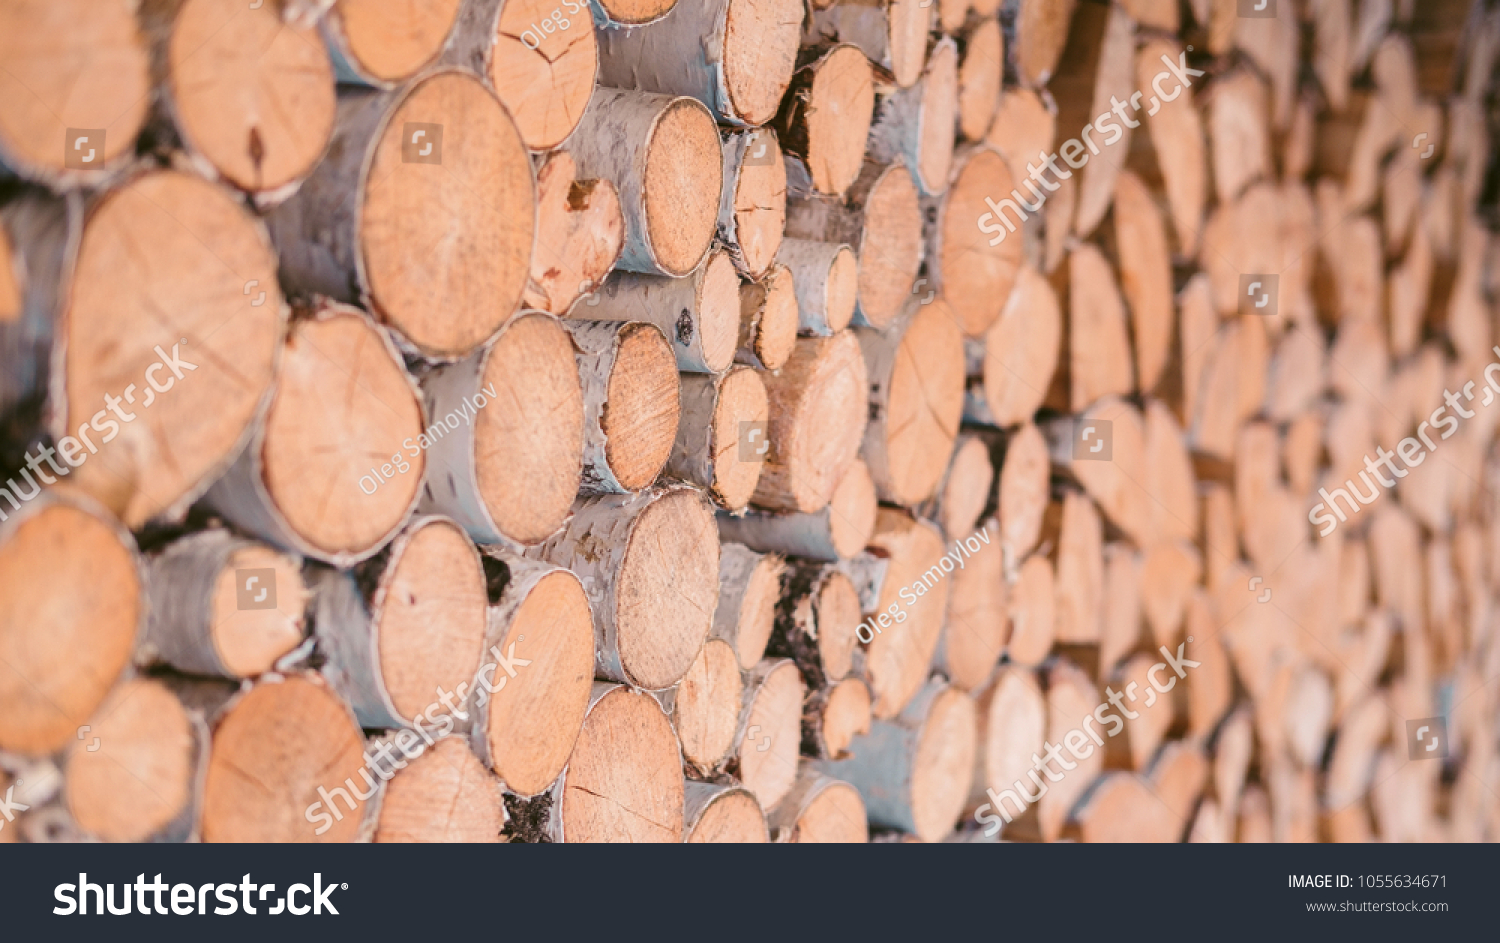 Firewood for the winter, stacks of firewood, pile of firewood. Firewood stacked and prepared for winter. #1055634671